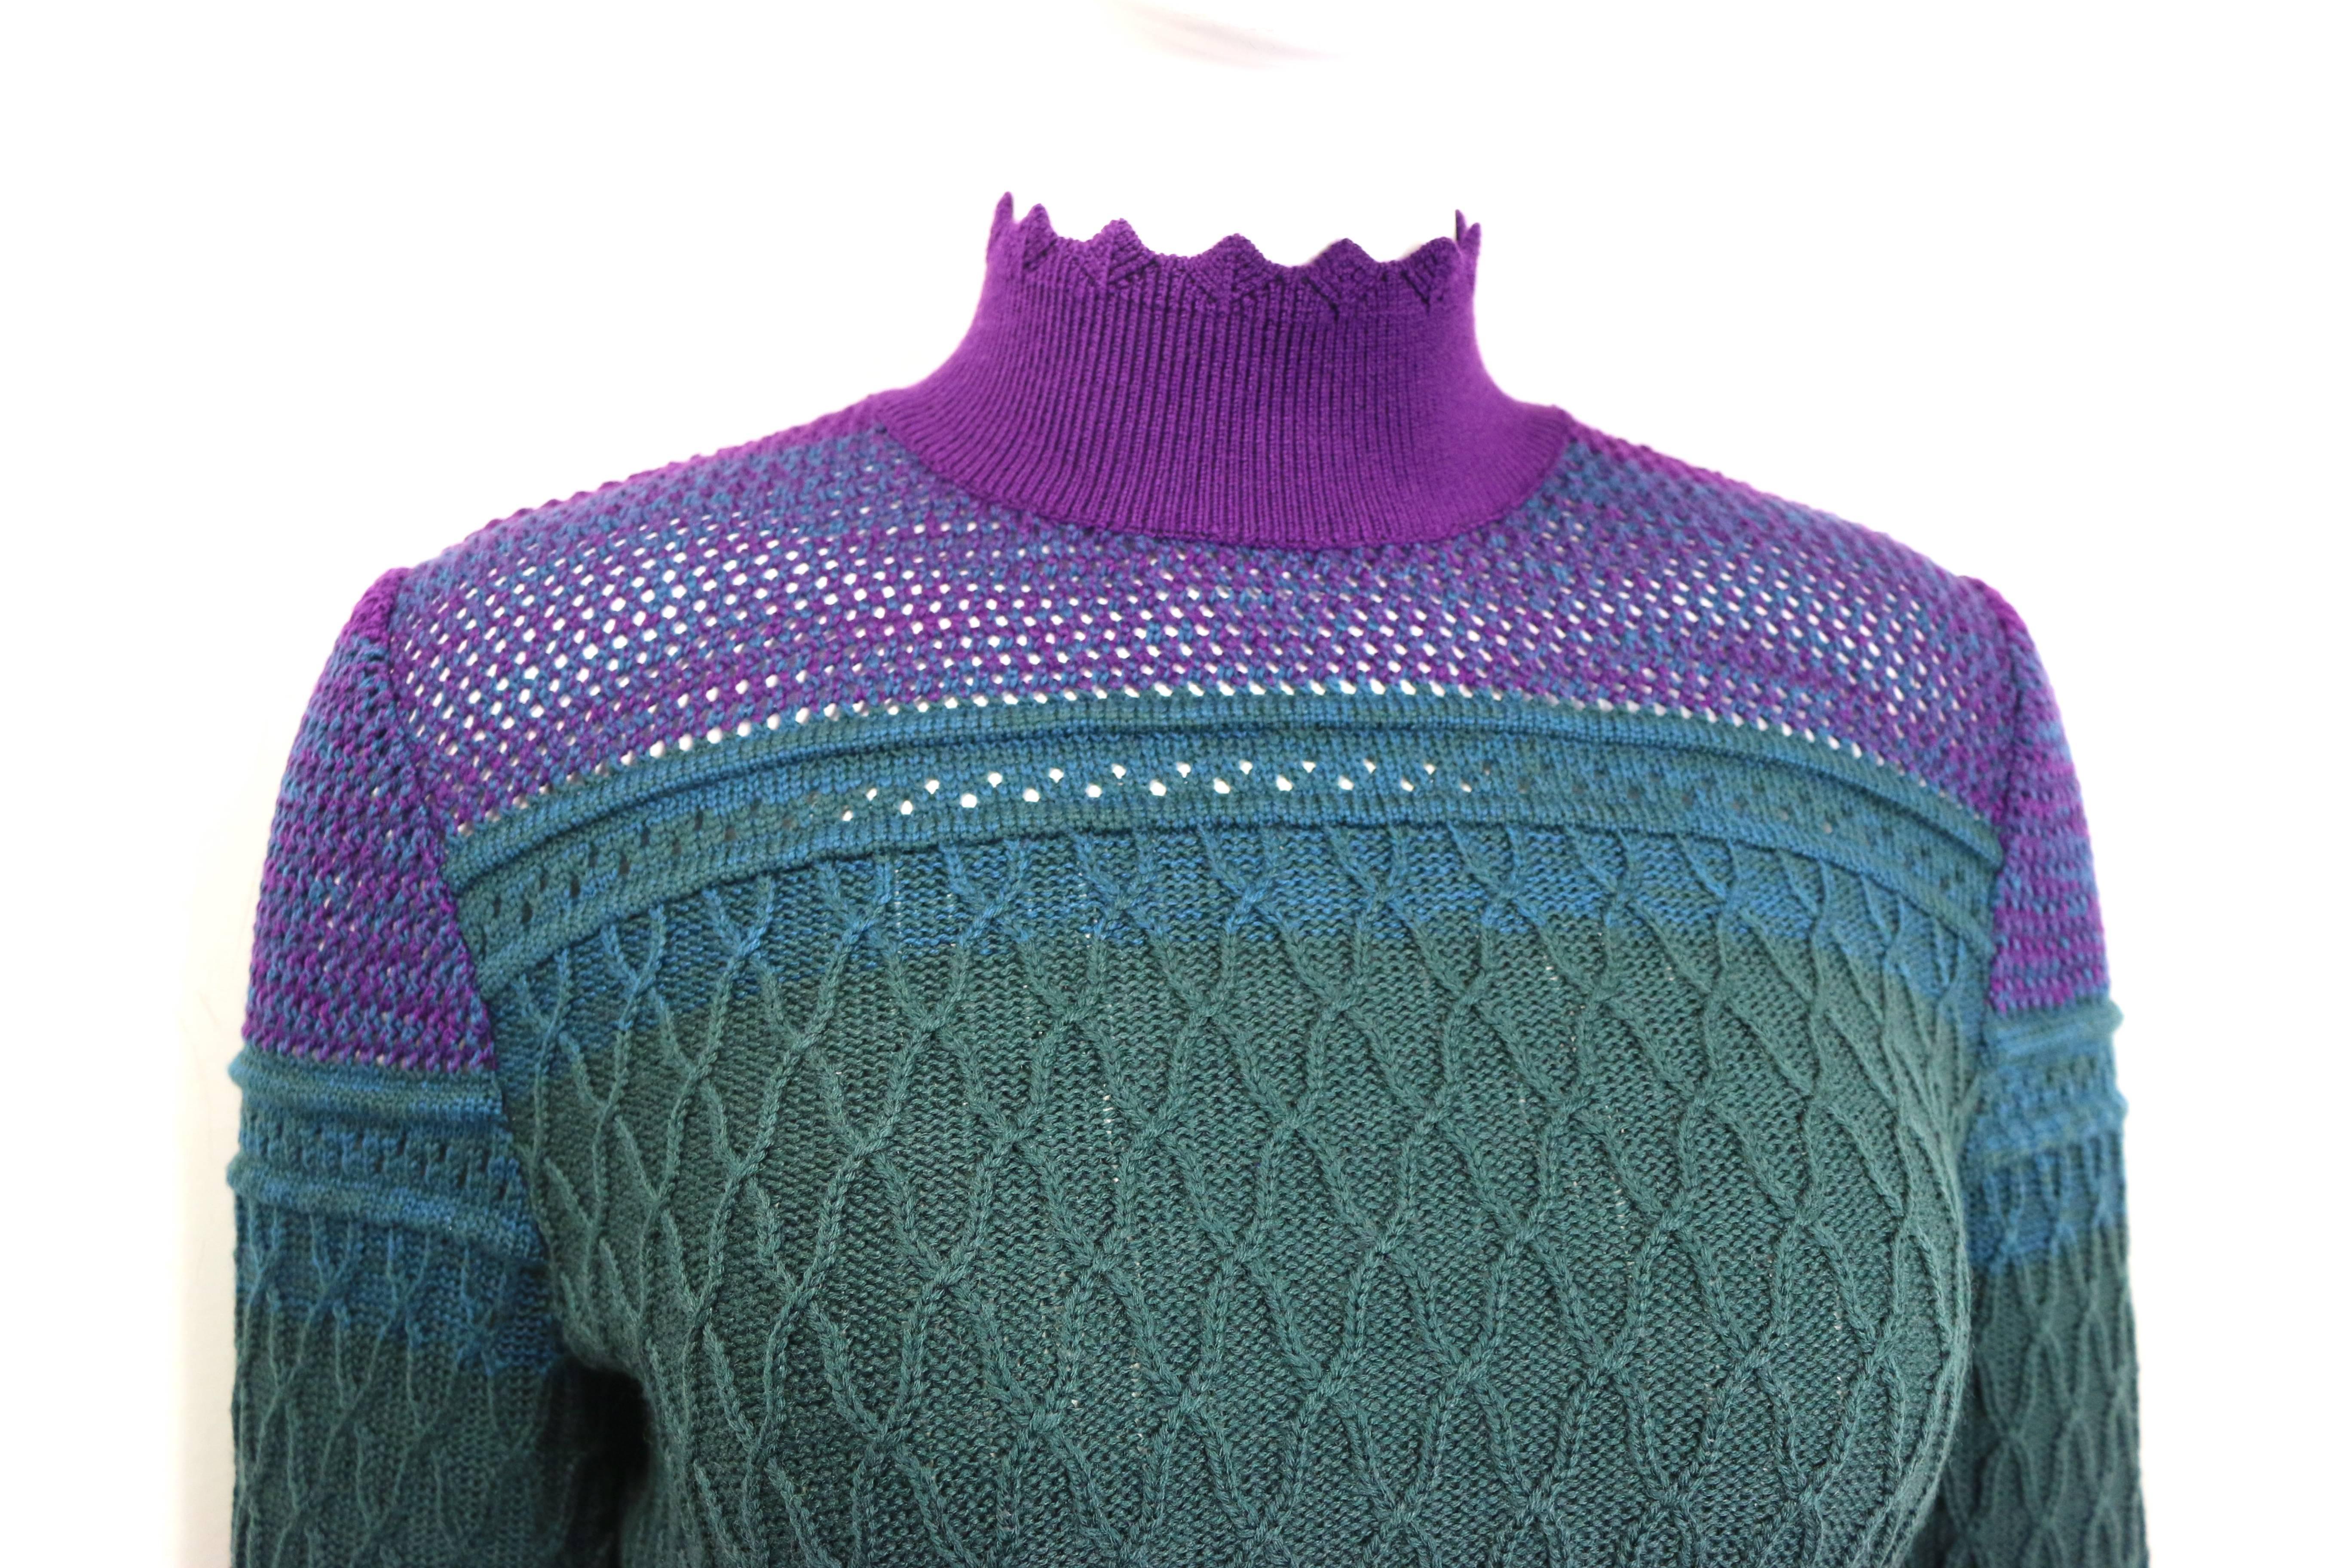 - Vintage Christian Lacroix purple/green/blue knitted pattern wool mock neck top from 1994 collection. 

- Round edge on the neck, hem and cuff. 

- Purple ribbed neck.

- Back zip closure. 

- Size M. 

- Shoulder: 14 inches. Bust: 30 inches.